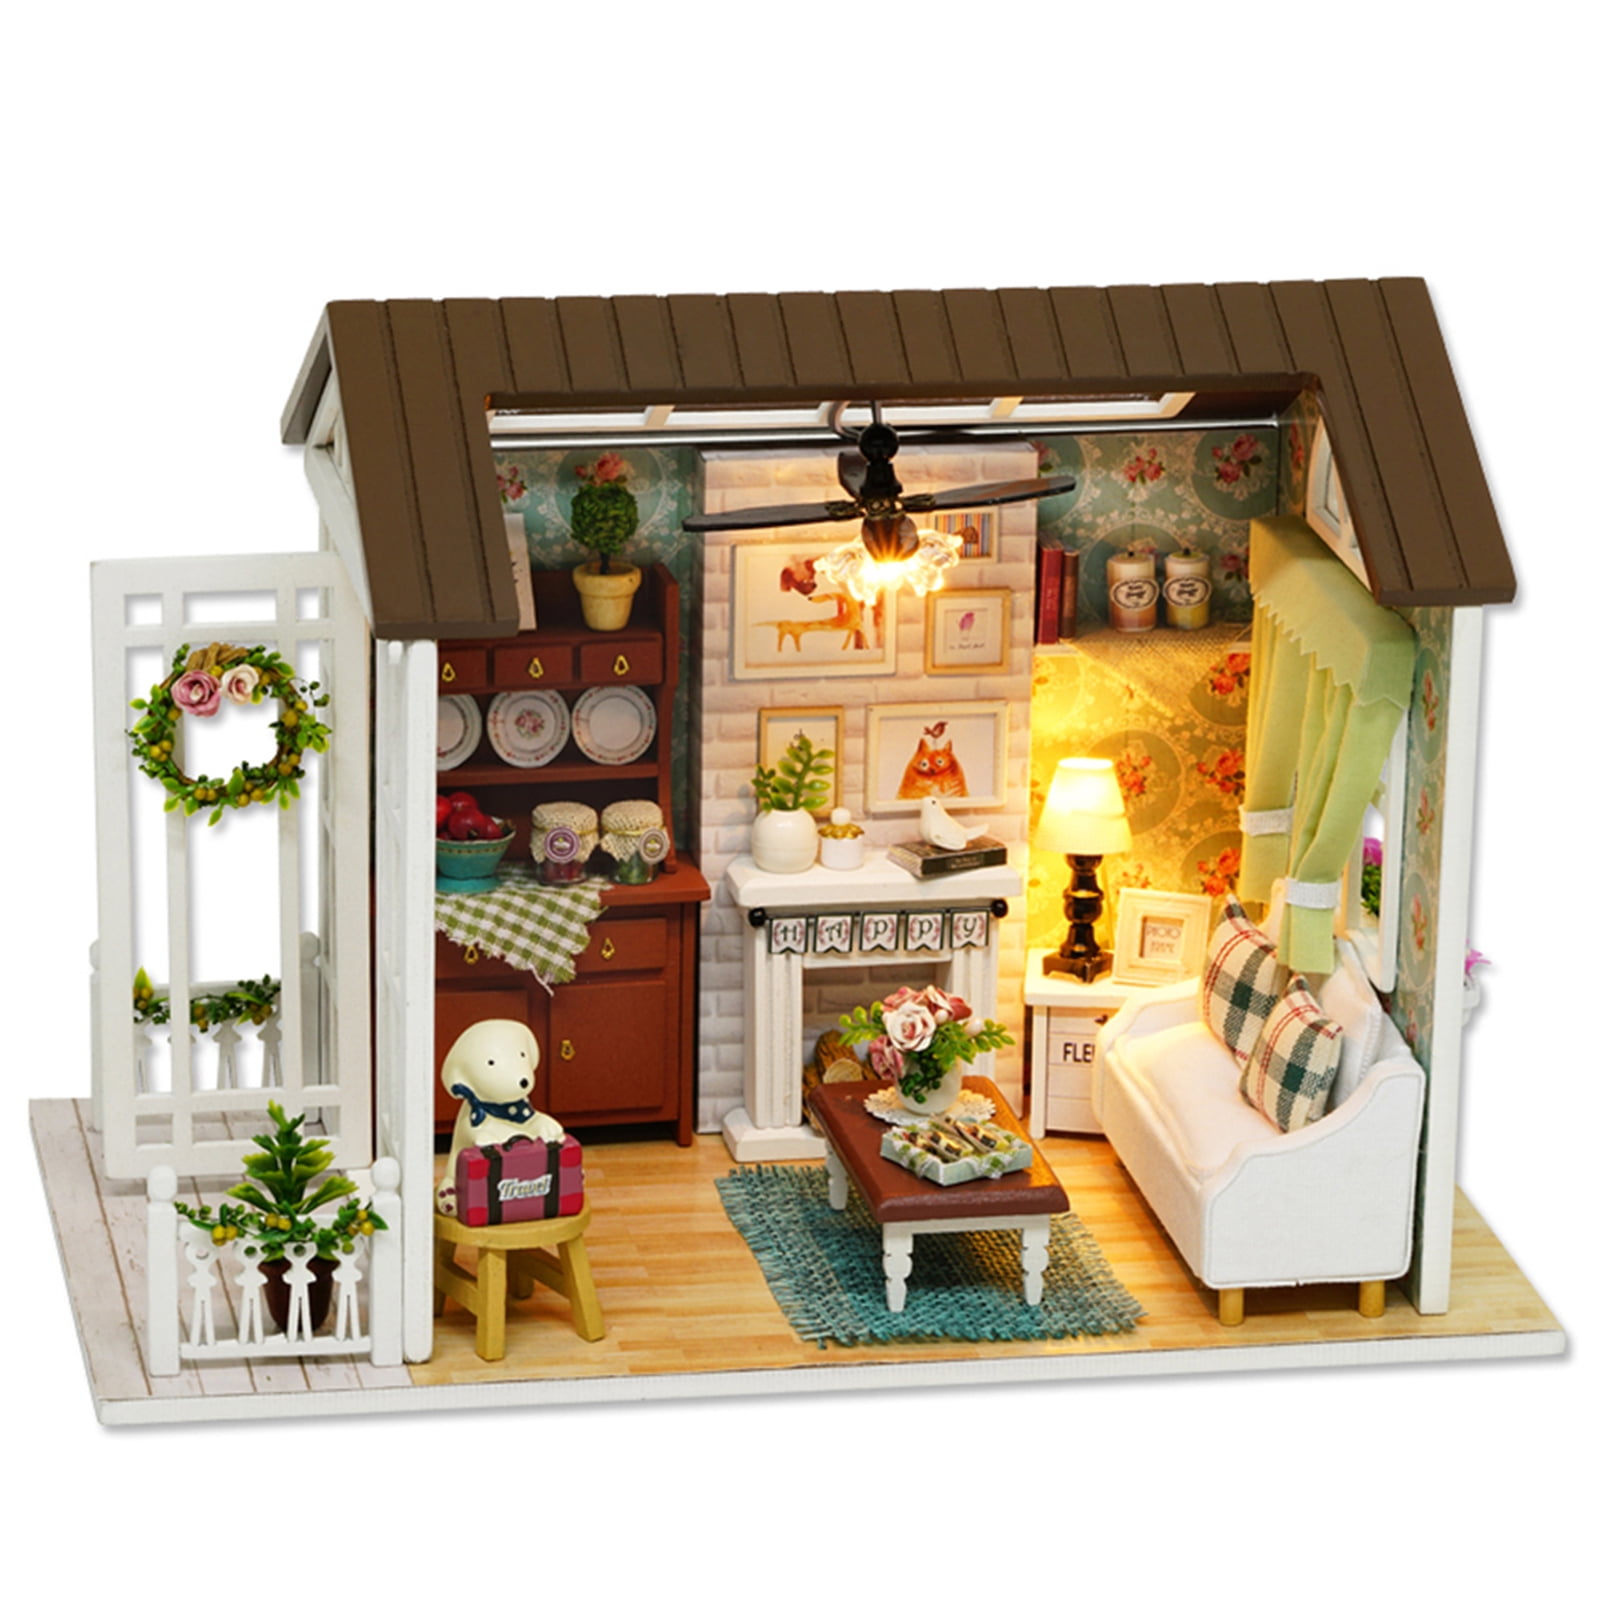 DIY Miniature Dollhouse Kit Realistic 3D Wooden House Room Craft